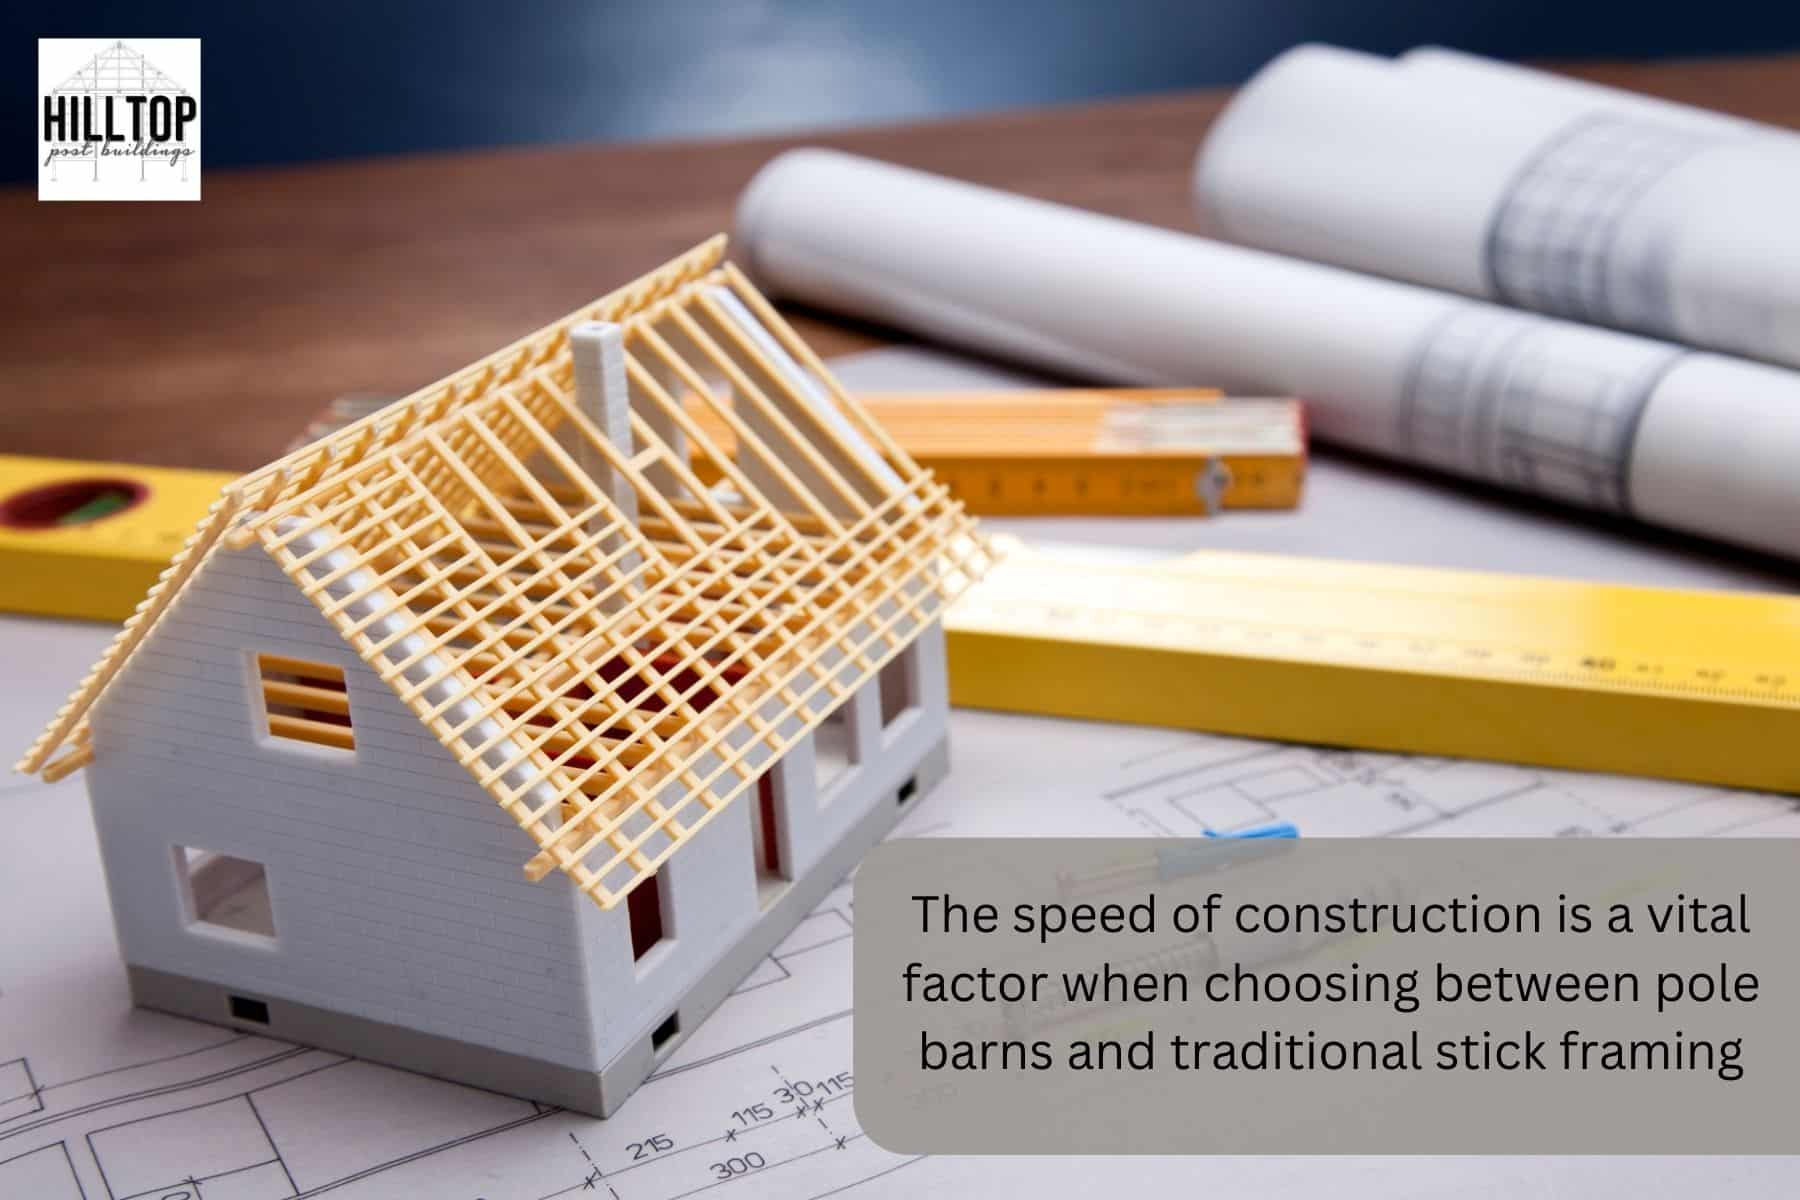 The speed of construction is a vital factor when choosing between pole barns and traditional stick framing.